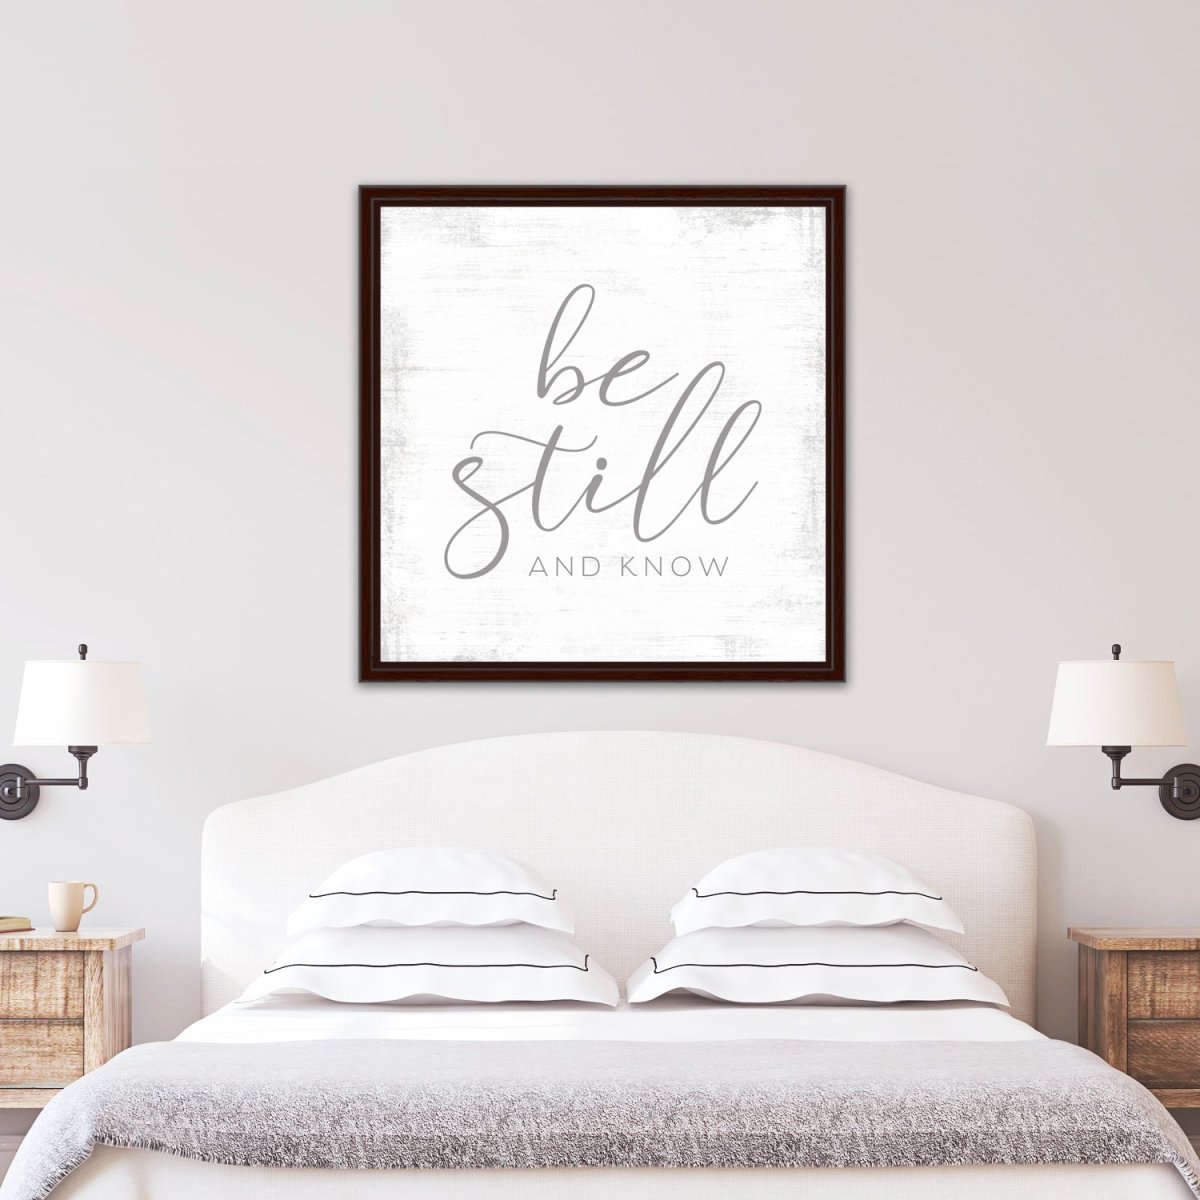 Be Still And Know Christian Wall Art Above Bed in Bedroom - Pretty Perfect Studio